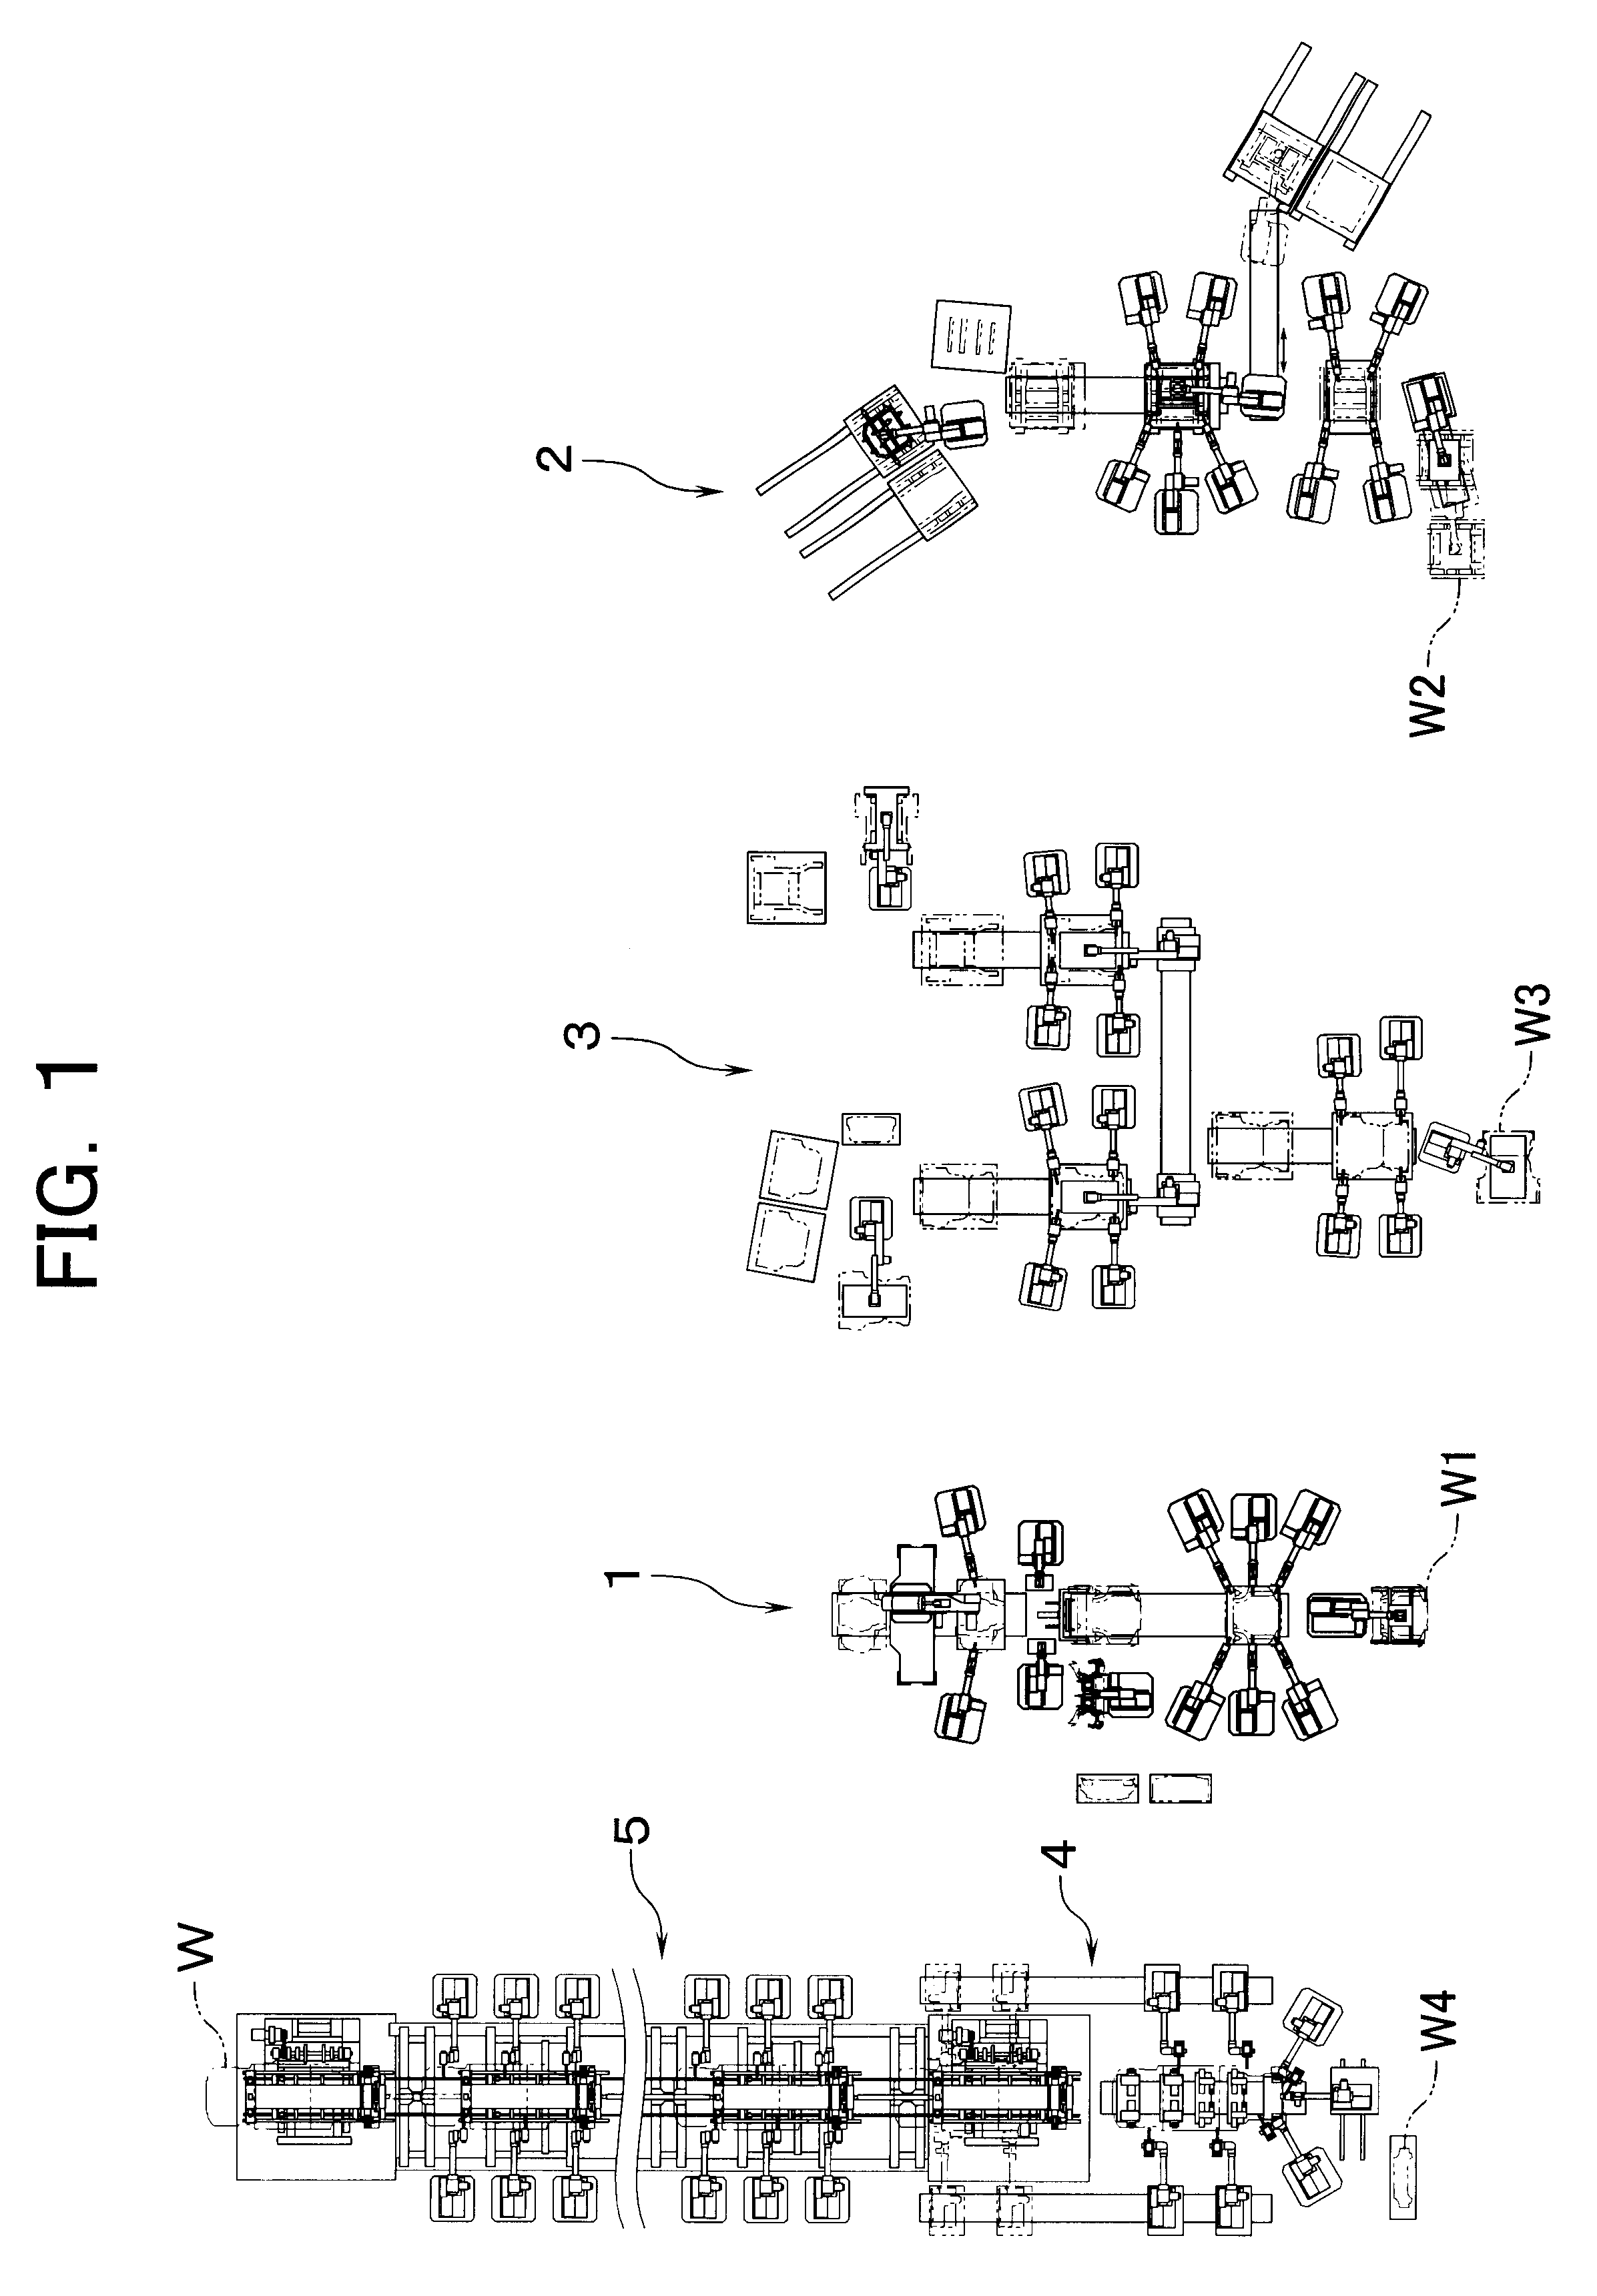 Method of manufacturing multiple kinds of products in arbitrarily selected order in one manufacturing line